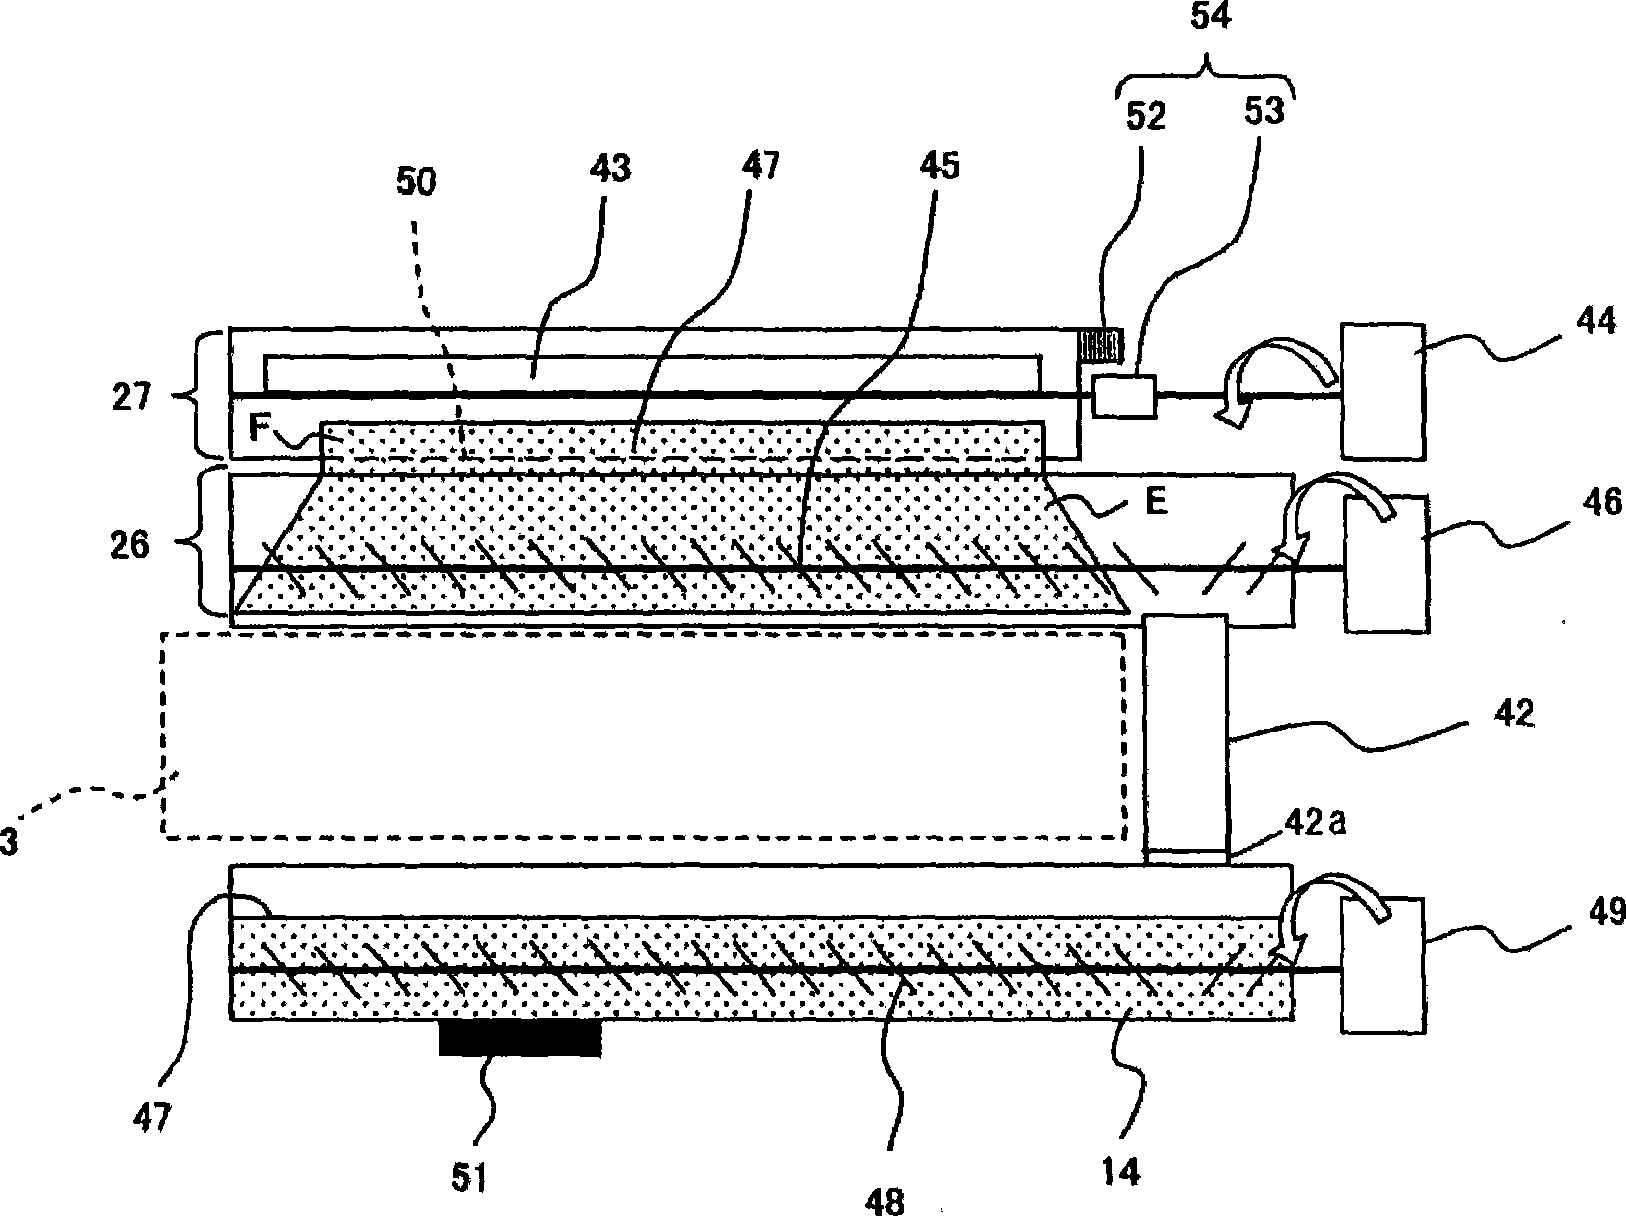 Image forming apparatus and toner refilling method therefor